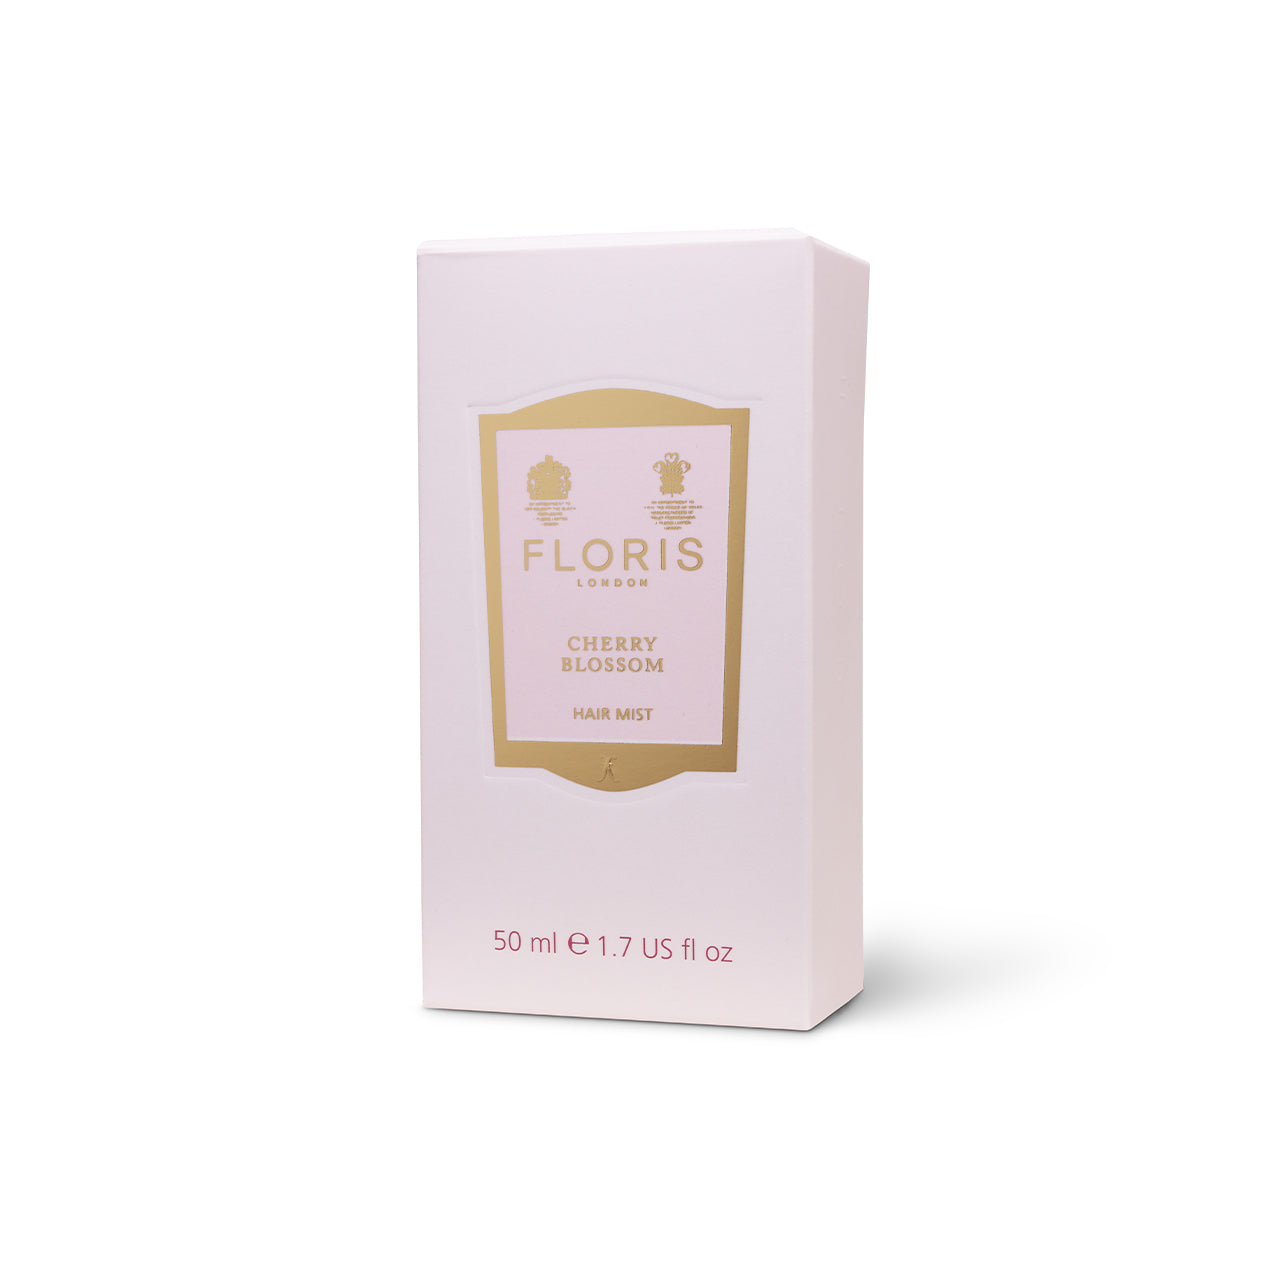 Pink and and gold packaging box for cherry blossom hair mist.